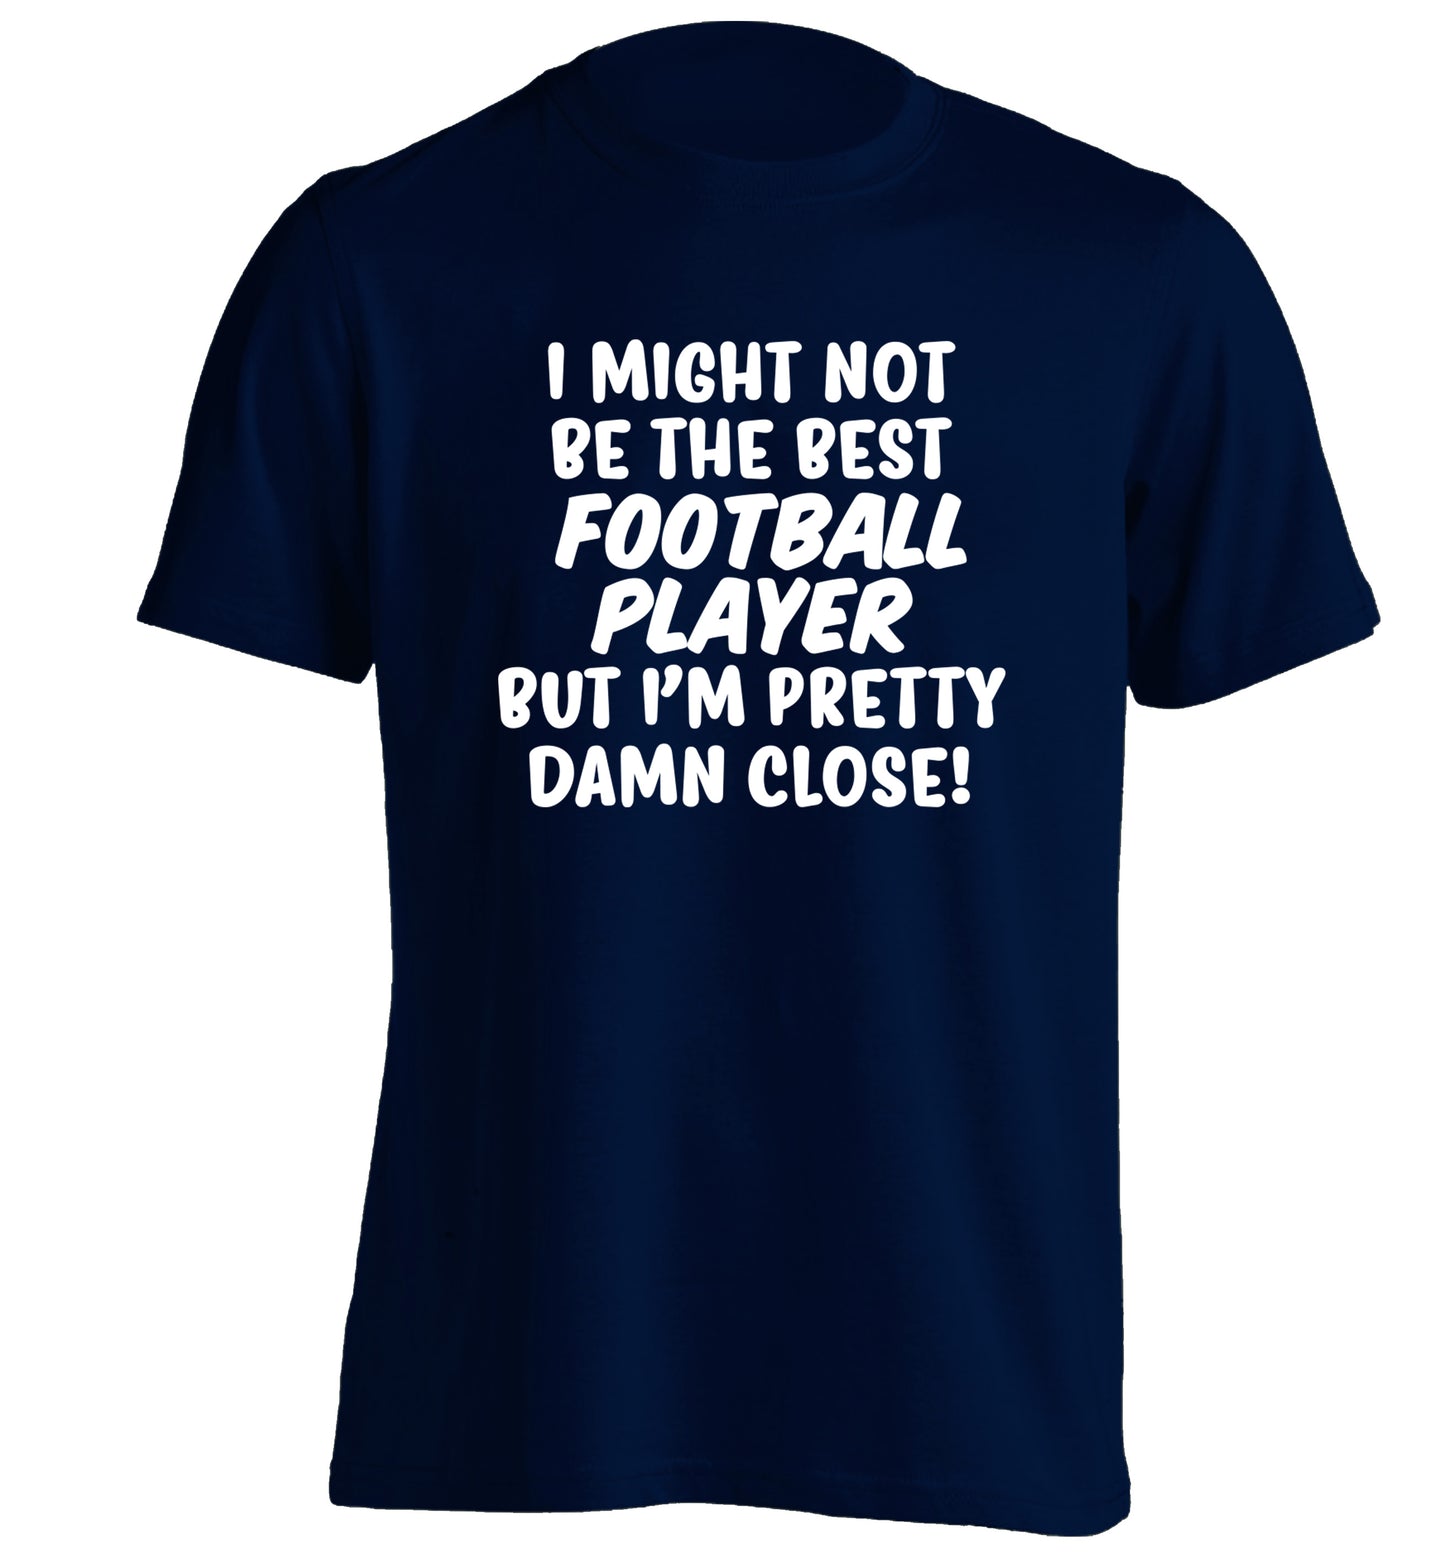 I might not be the best football player but I'm pretty close! adults unisexnavy Tshirt 2XL